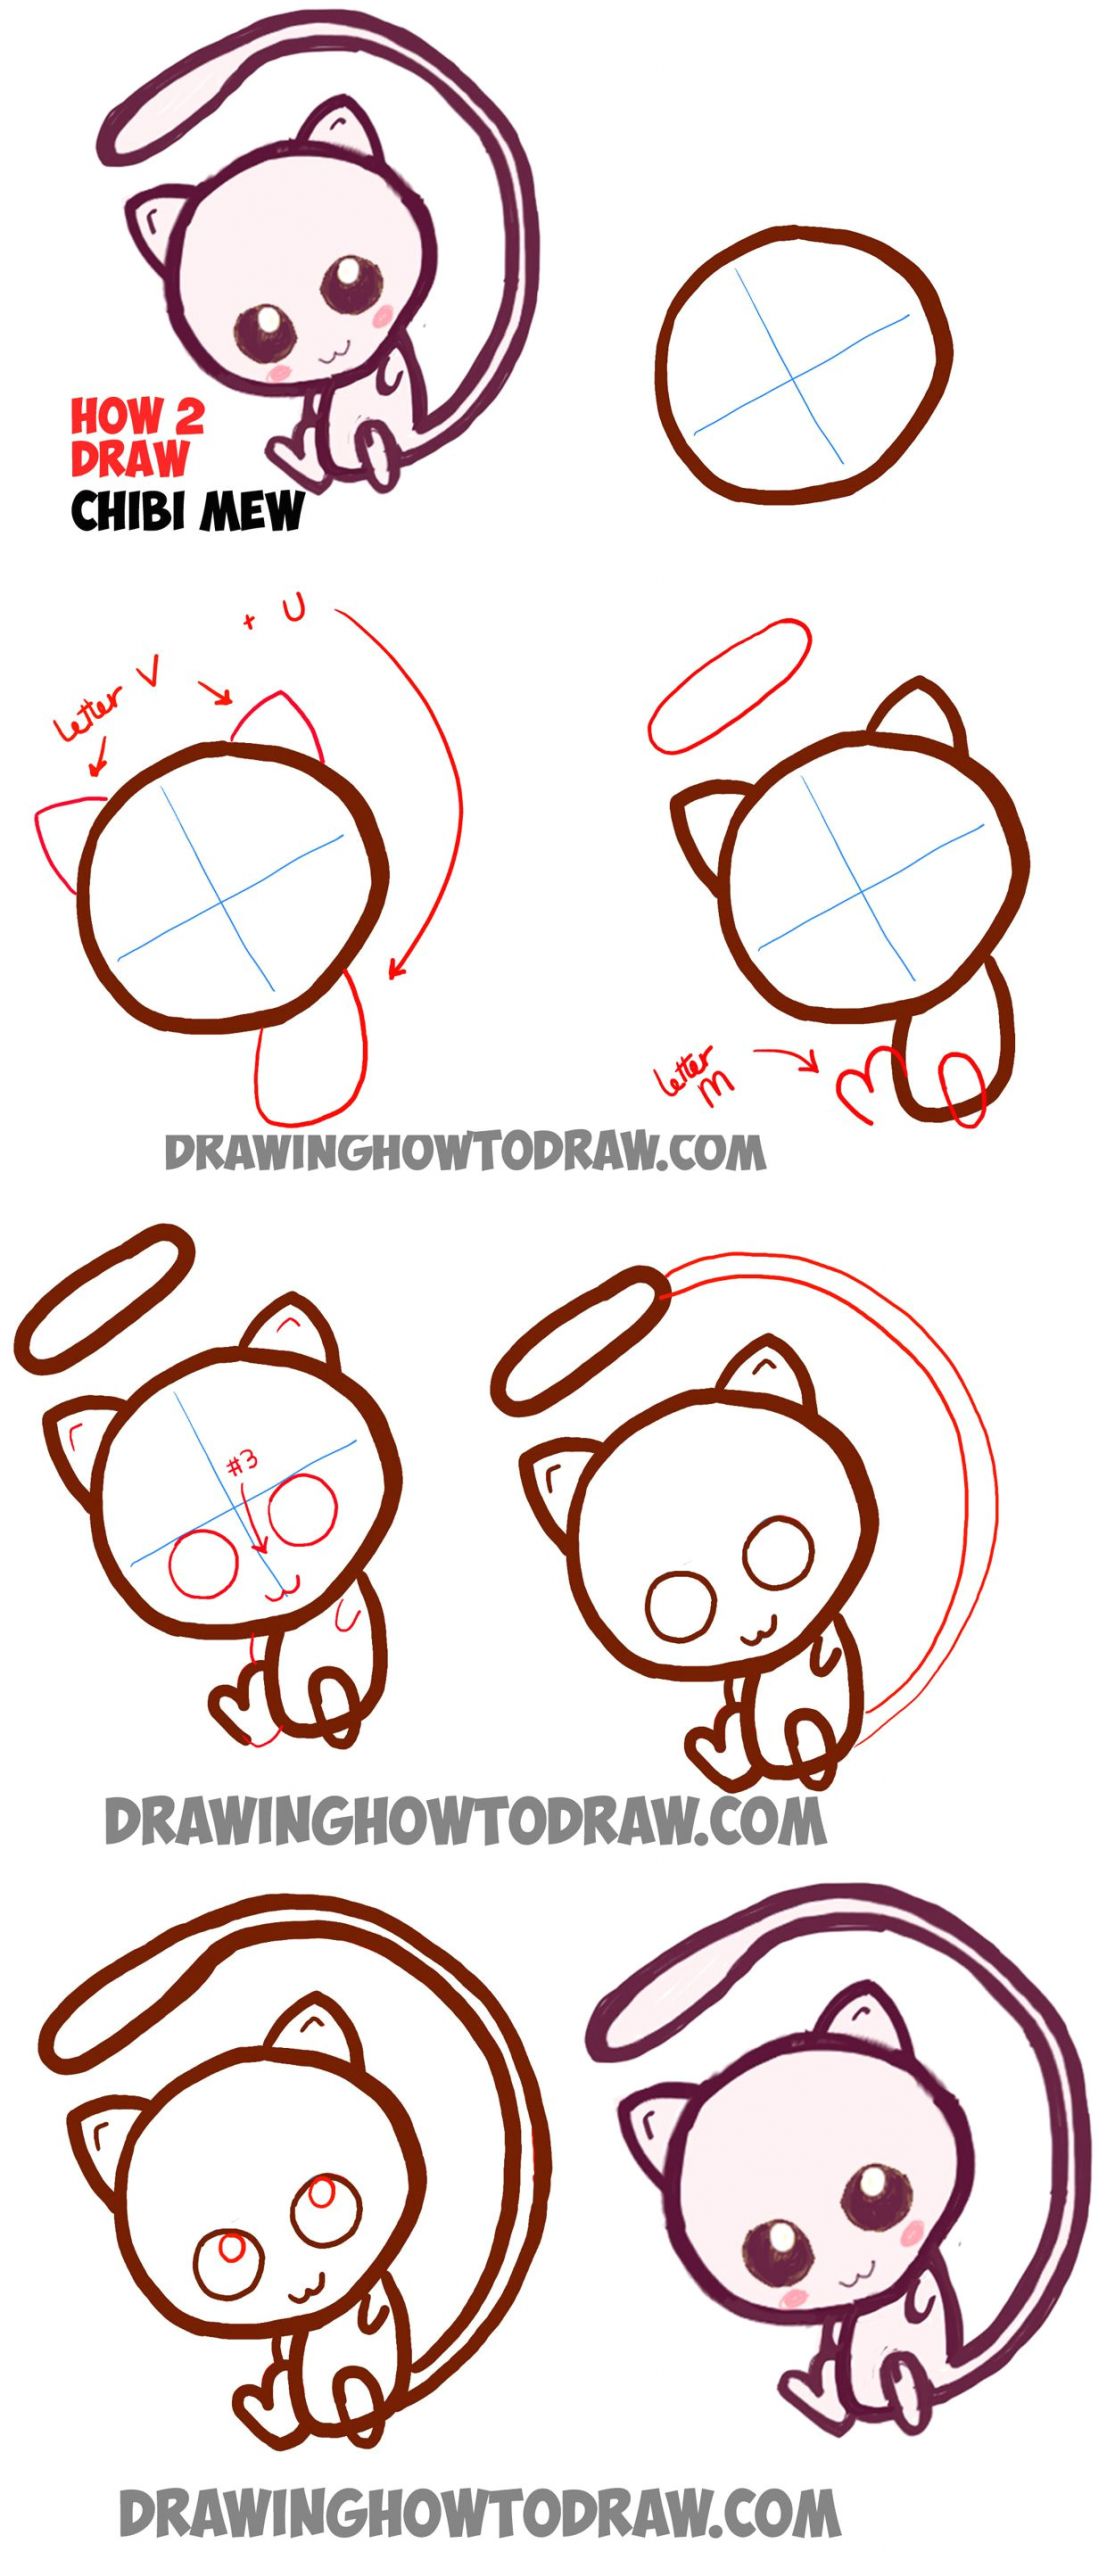 Cute Easy Drawings Step by Step Animals How to Draw Cute Baby Chibi Mew From Pokemon Easy Step by